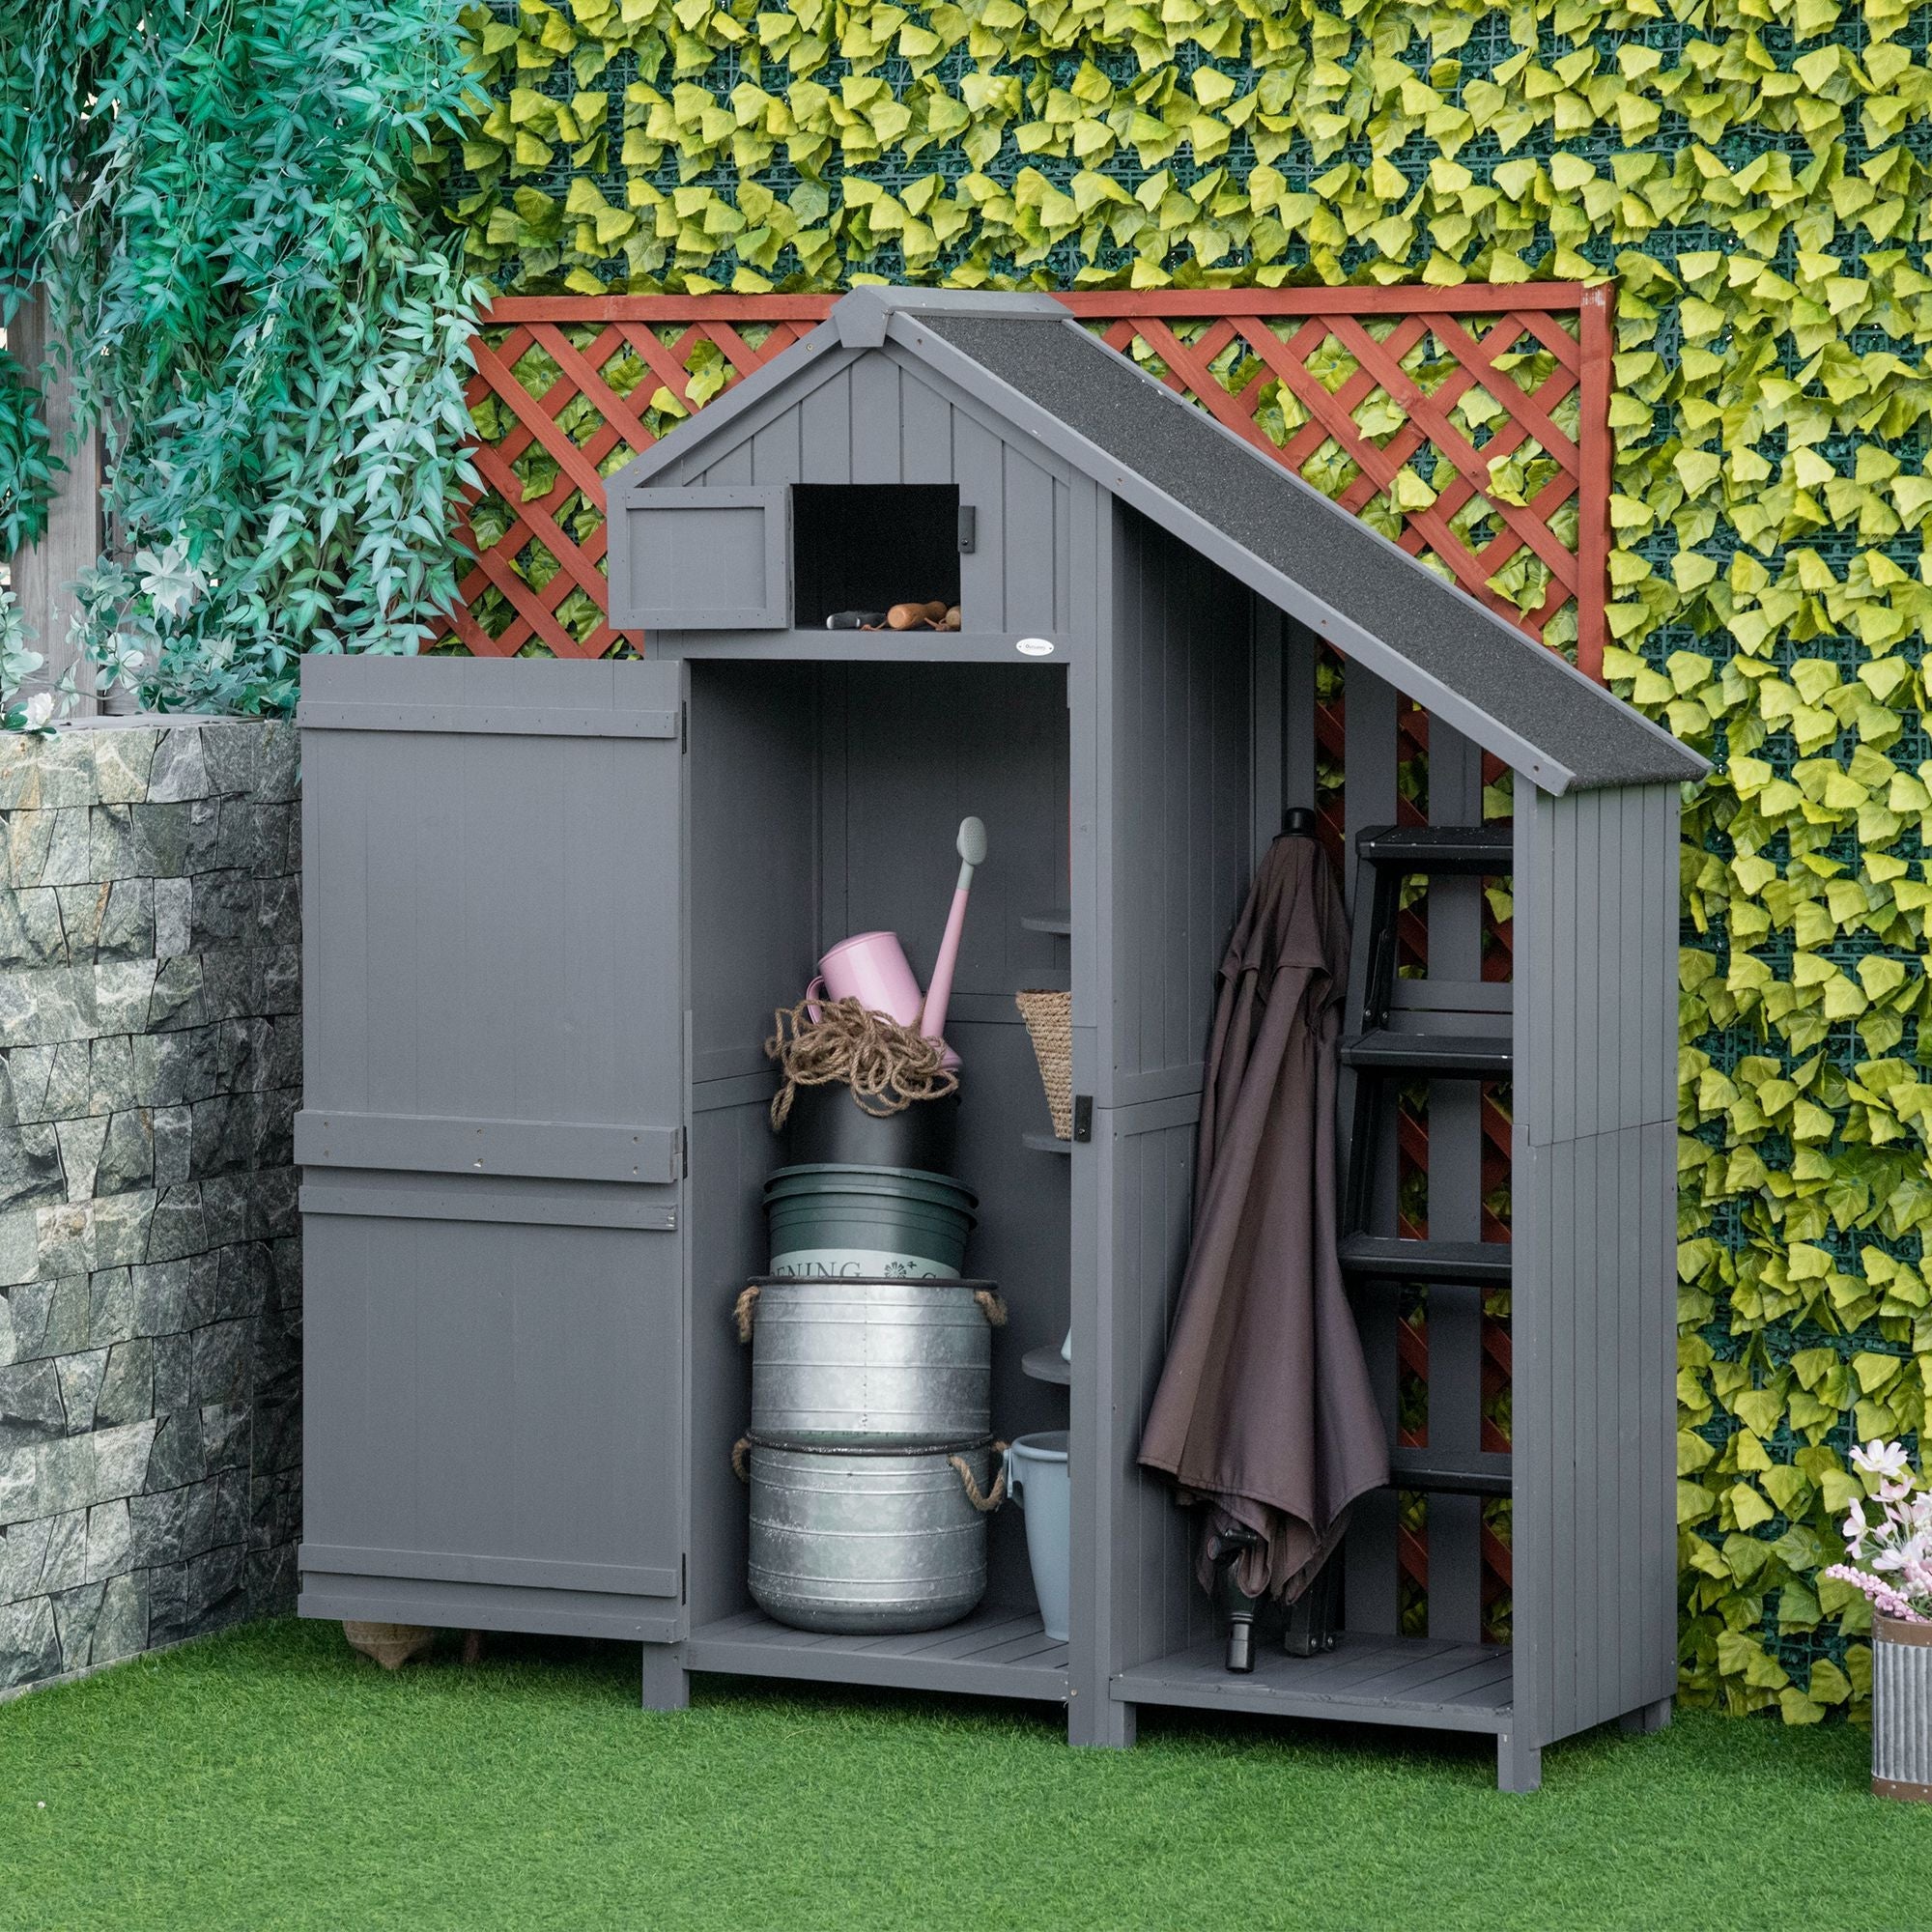 Outsunny Garden Outdoor Storage Shed Outdoor Tool Shed with 3 Shelves and Tilt Roof, 129x51.5x180cm, Grey - TovaHaus